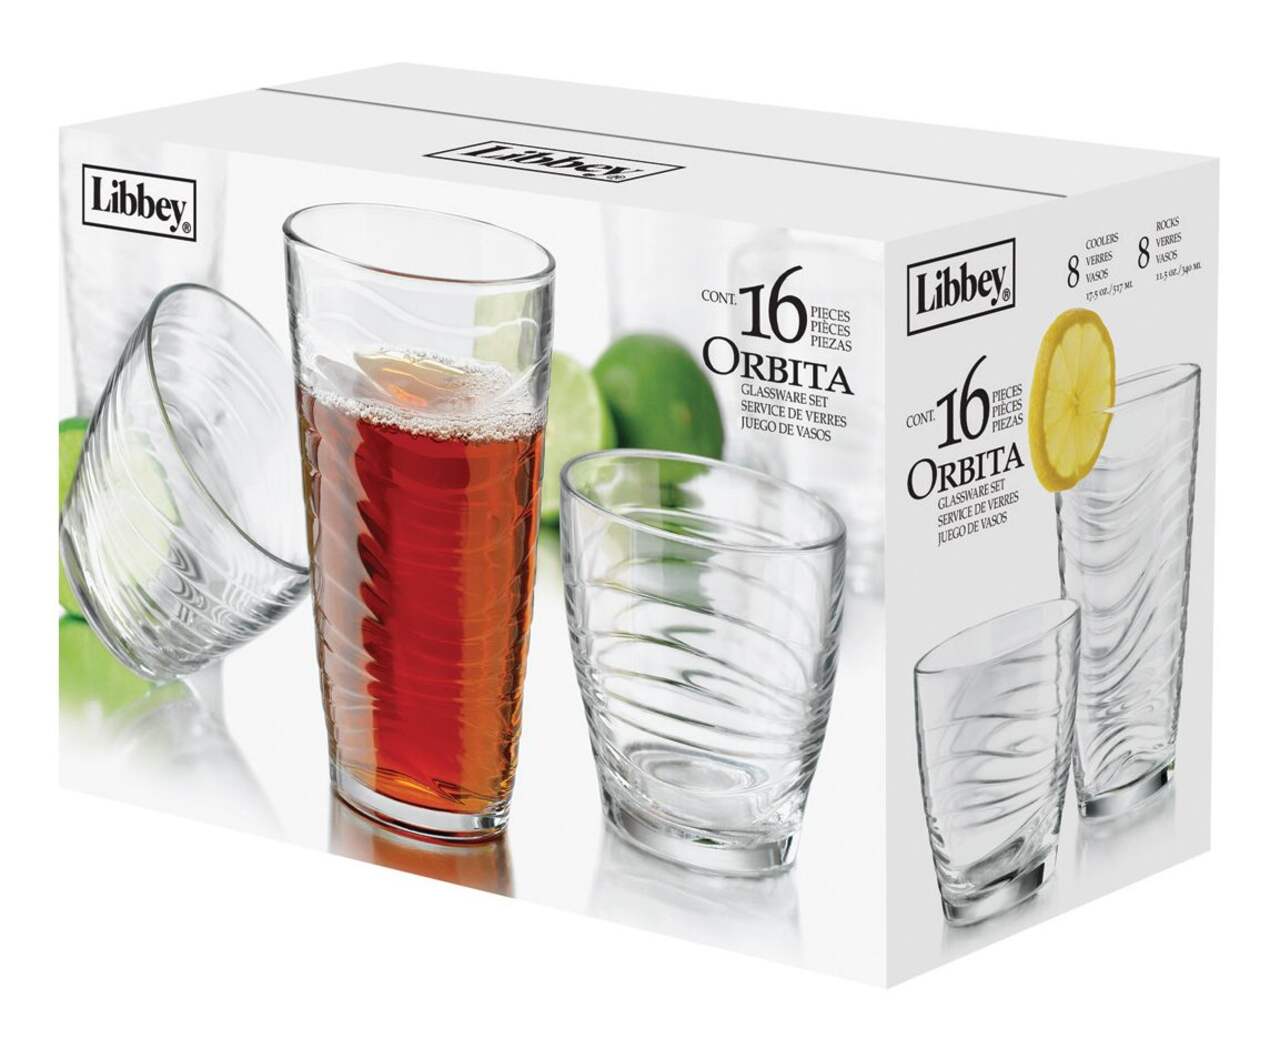 https://media-www.canadiantire.ca/product/living/kitchen/dining-and-entertaining/1421529/libbey-16pc-orbita-tumbler-set-582a2a2e-1b97-4ab8-b642-078009b6288e-jpgrendition.jpg?imdensity=1&imwidth=1244&impolicy=mZoom